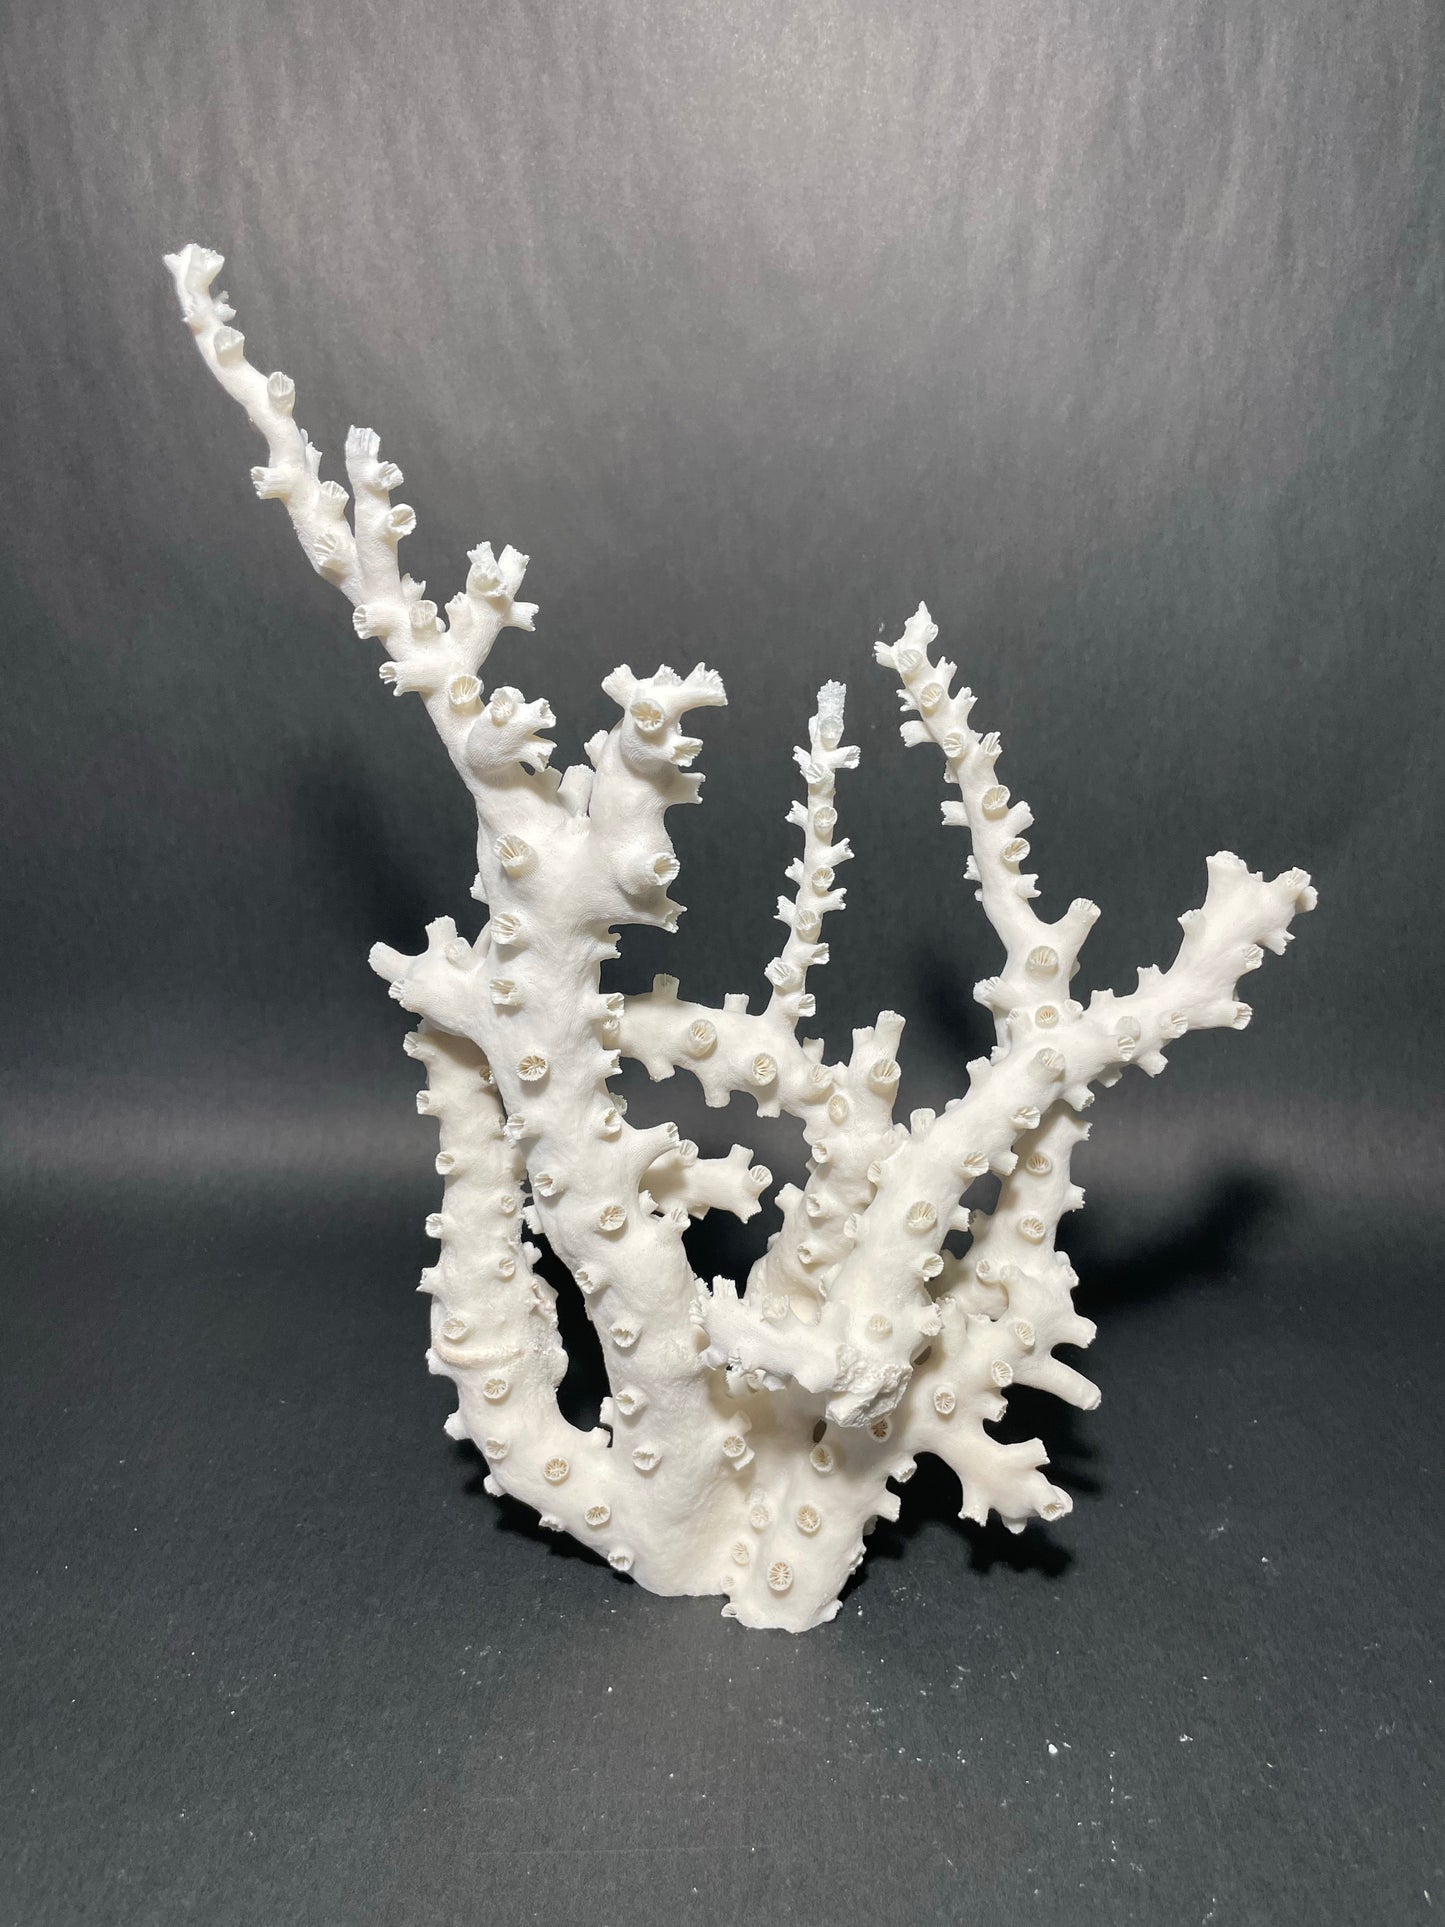 Octopus Coral (13”x10”x4”)